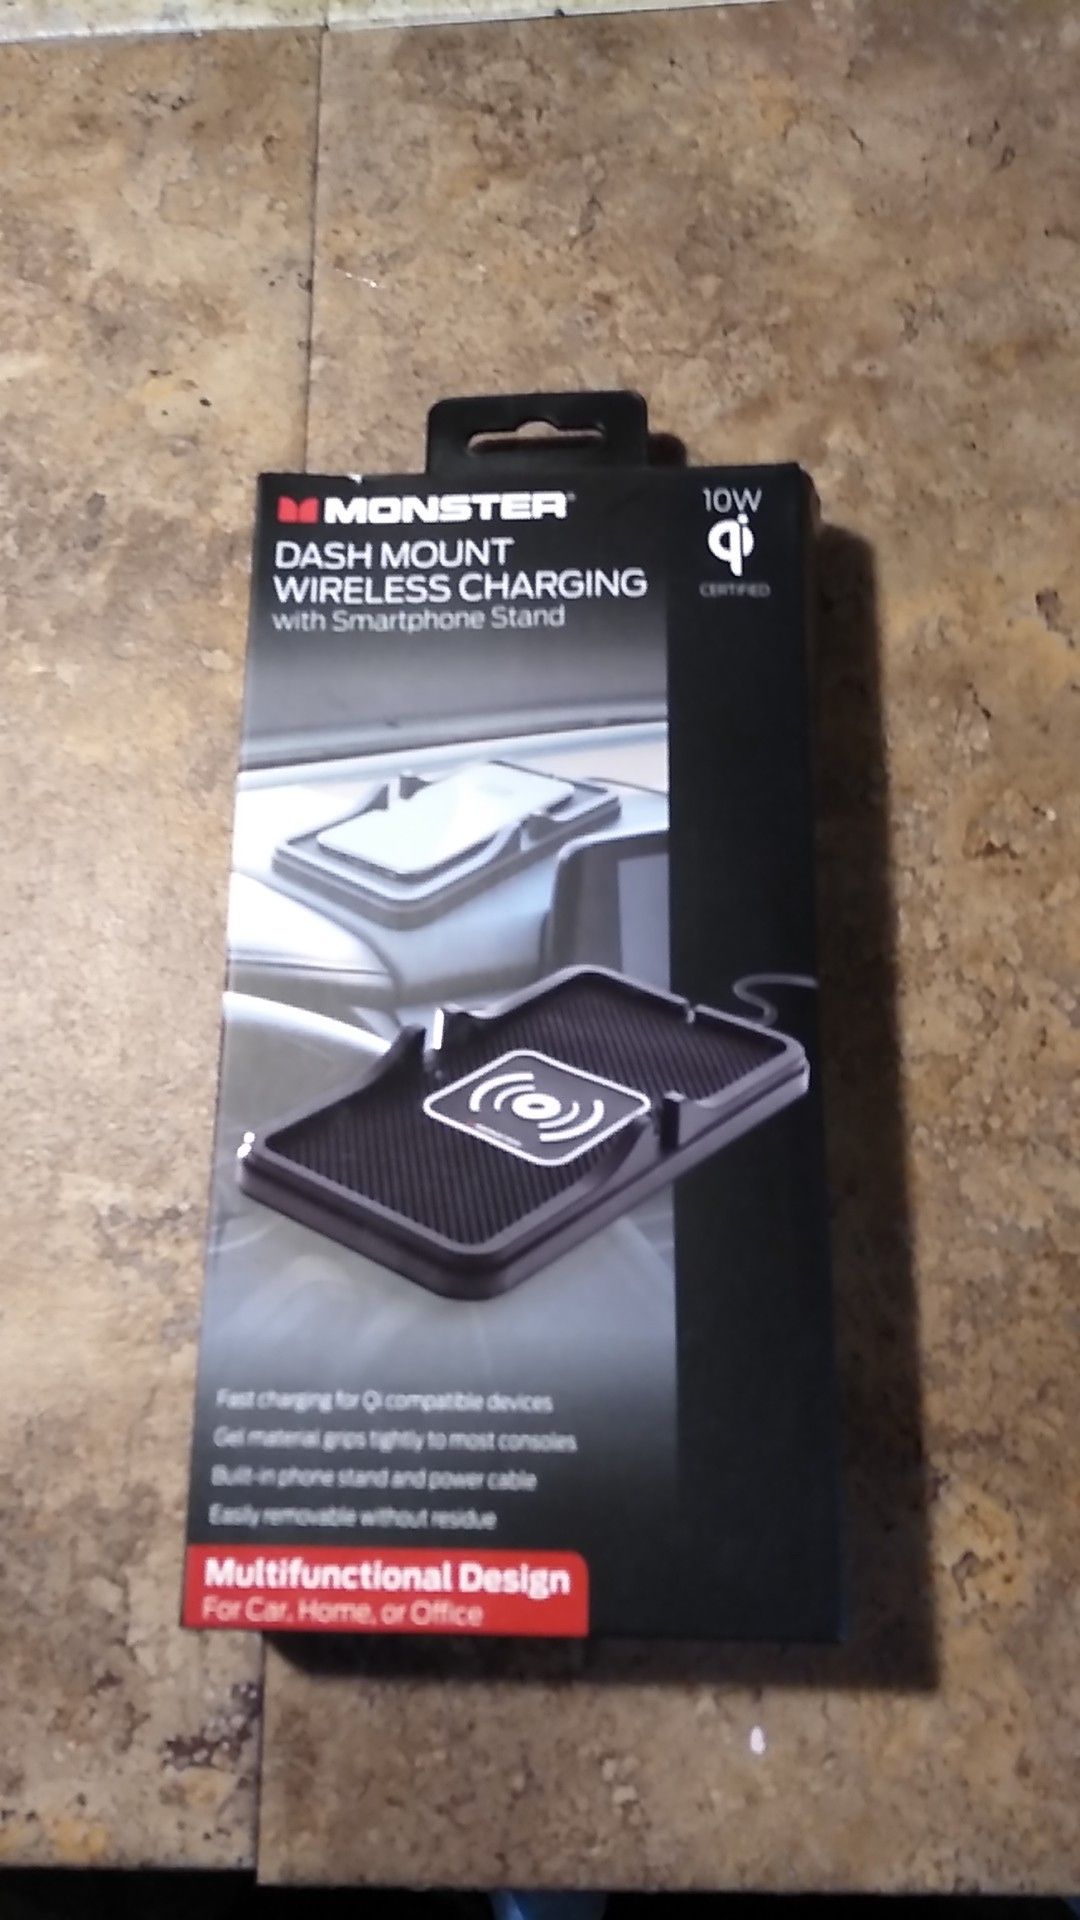 Monster dash mount wireless charging with smartphone stand